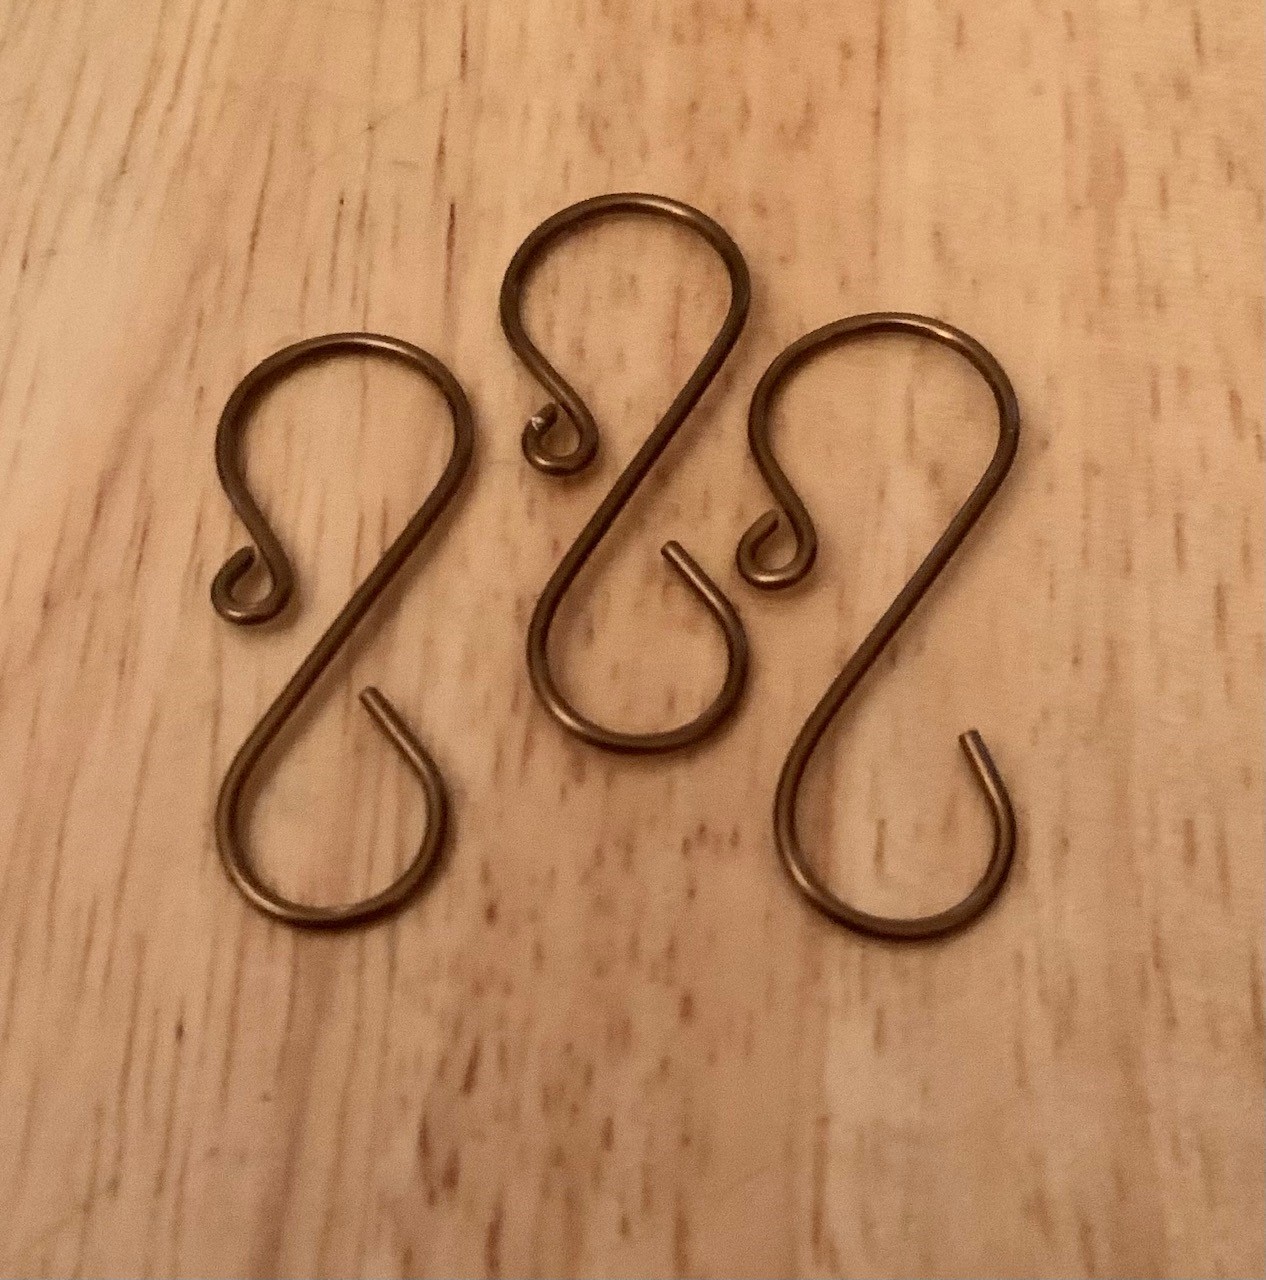 Ornament Hooks – Handmade 18 gauge SILVER coated copper wire 1.25